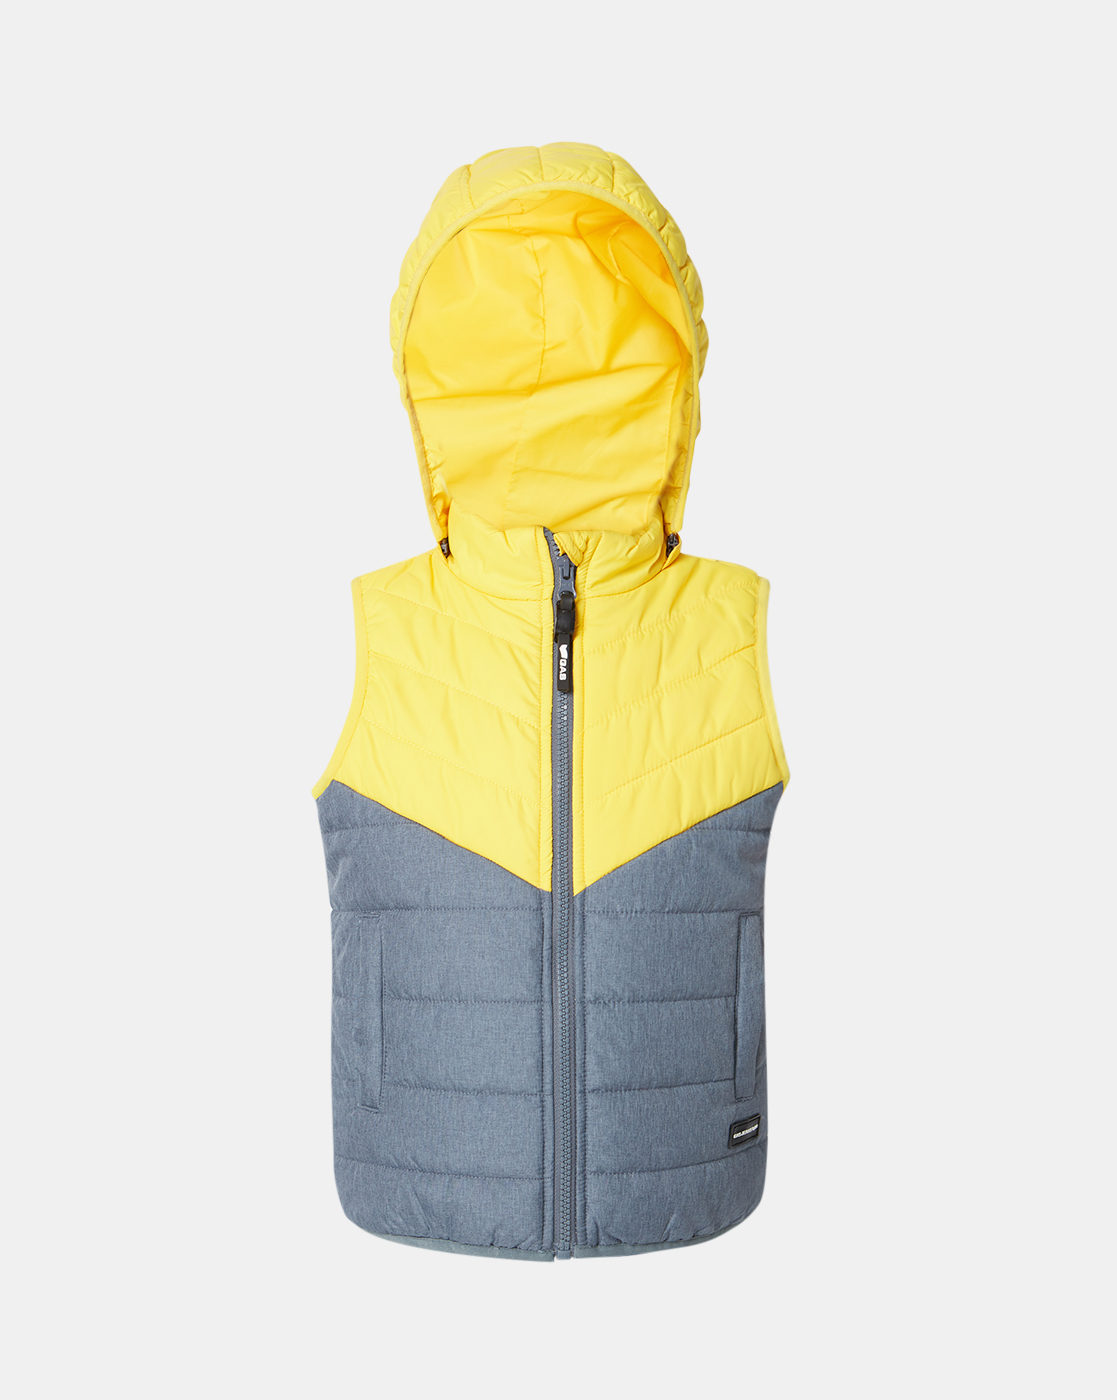 Gas Kids Boys Grey Color Block Quilted Jacket